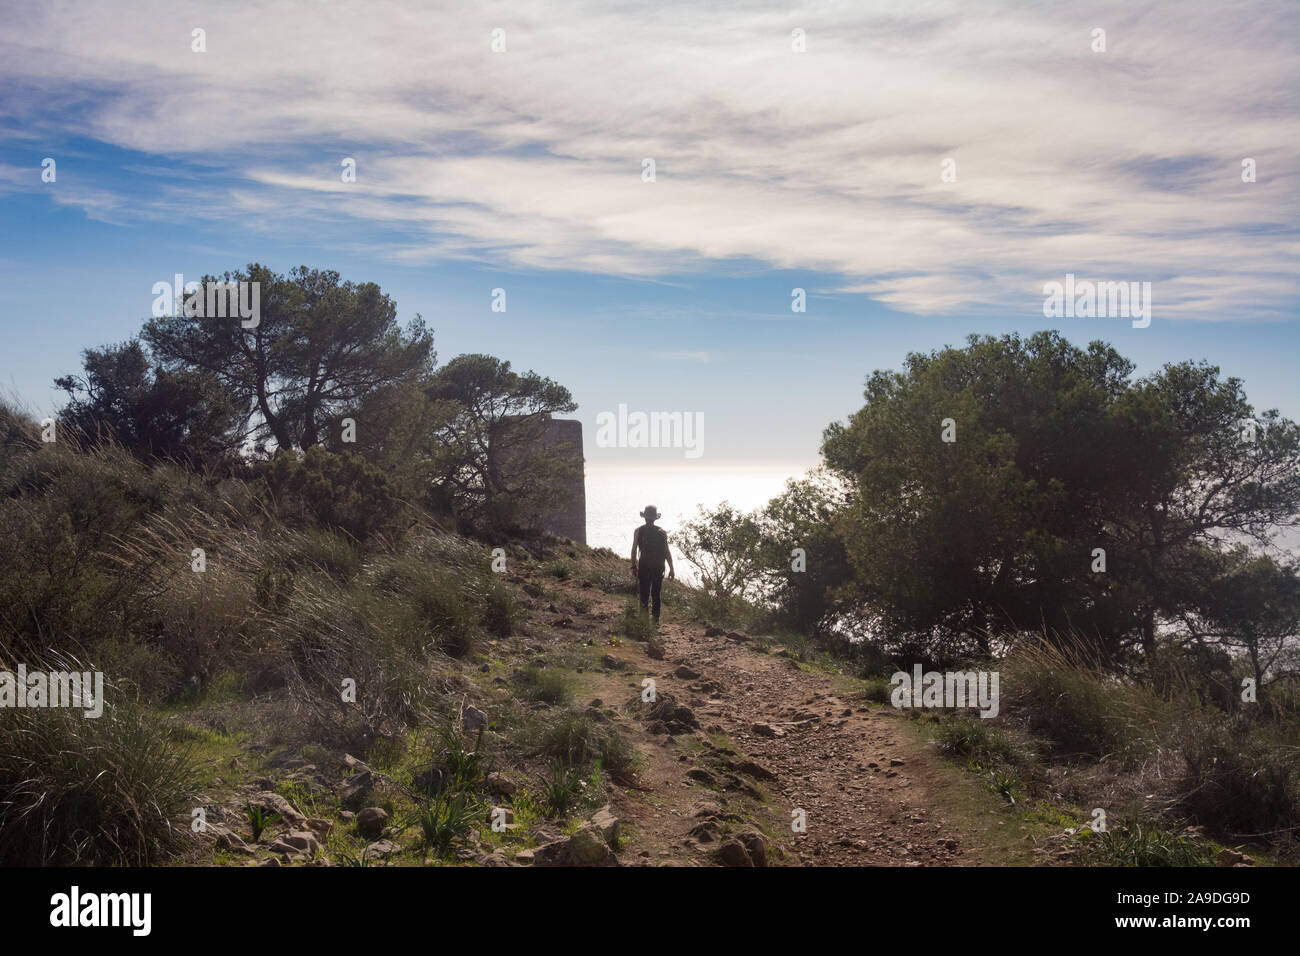 A man hiking the trail on the Cerro Gordo with the watch tower just visible behind the trees. La Herradura, Spain. Stock Photo